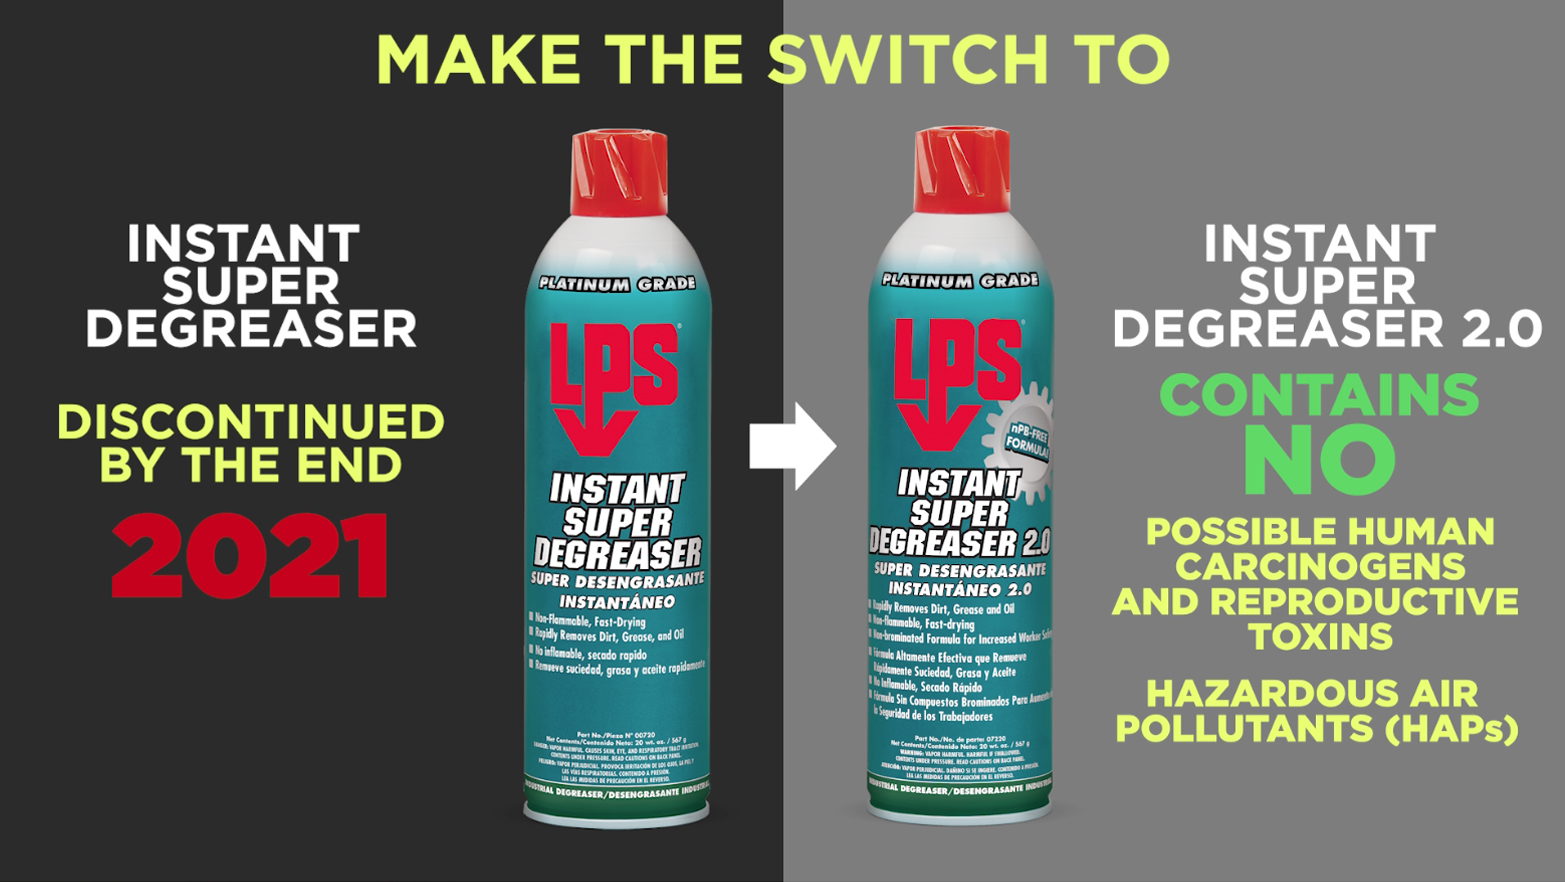 Upgrade to Instant Super Degreaser 2.0 an nPB degreaser